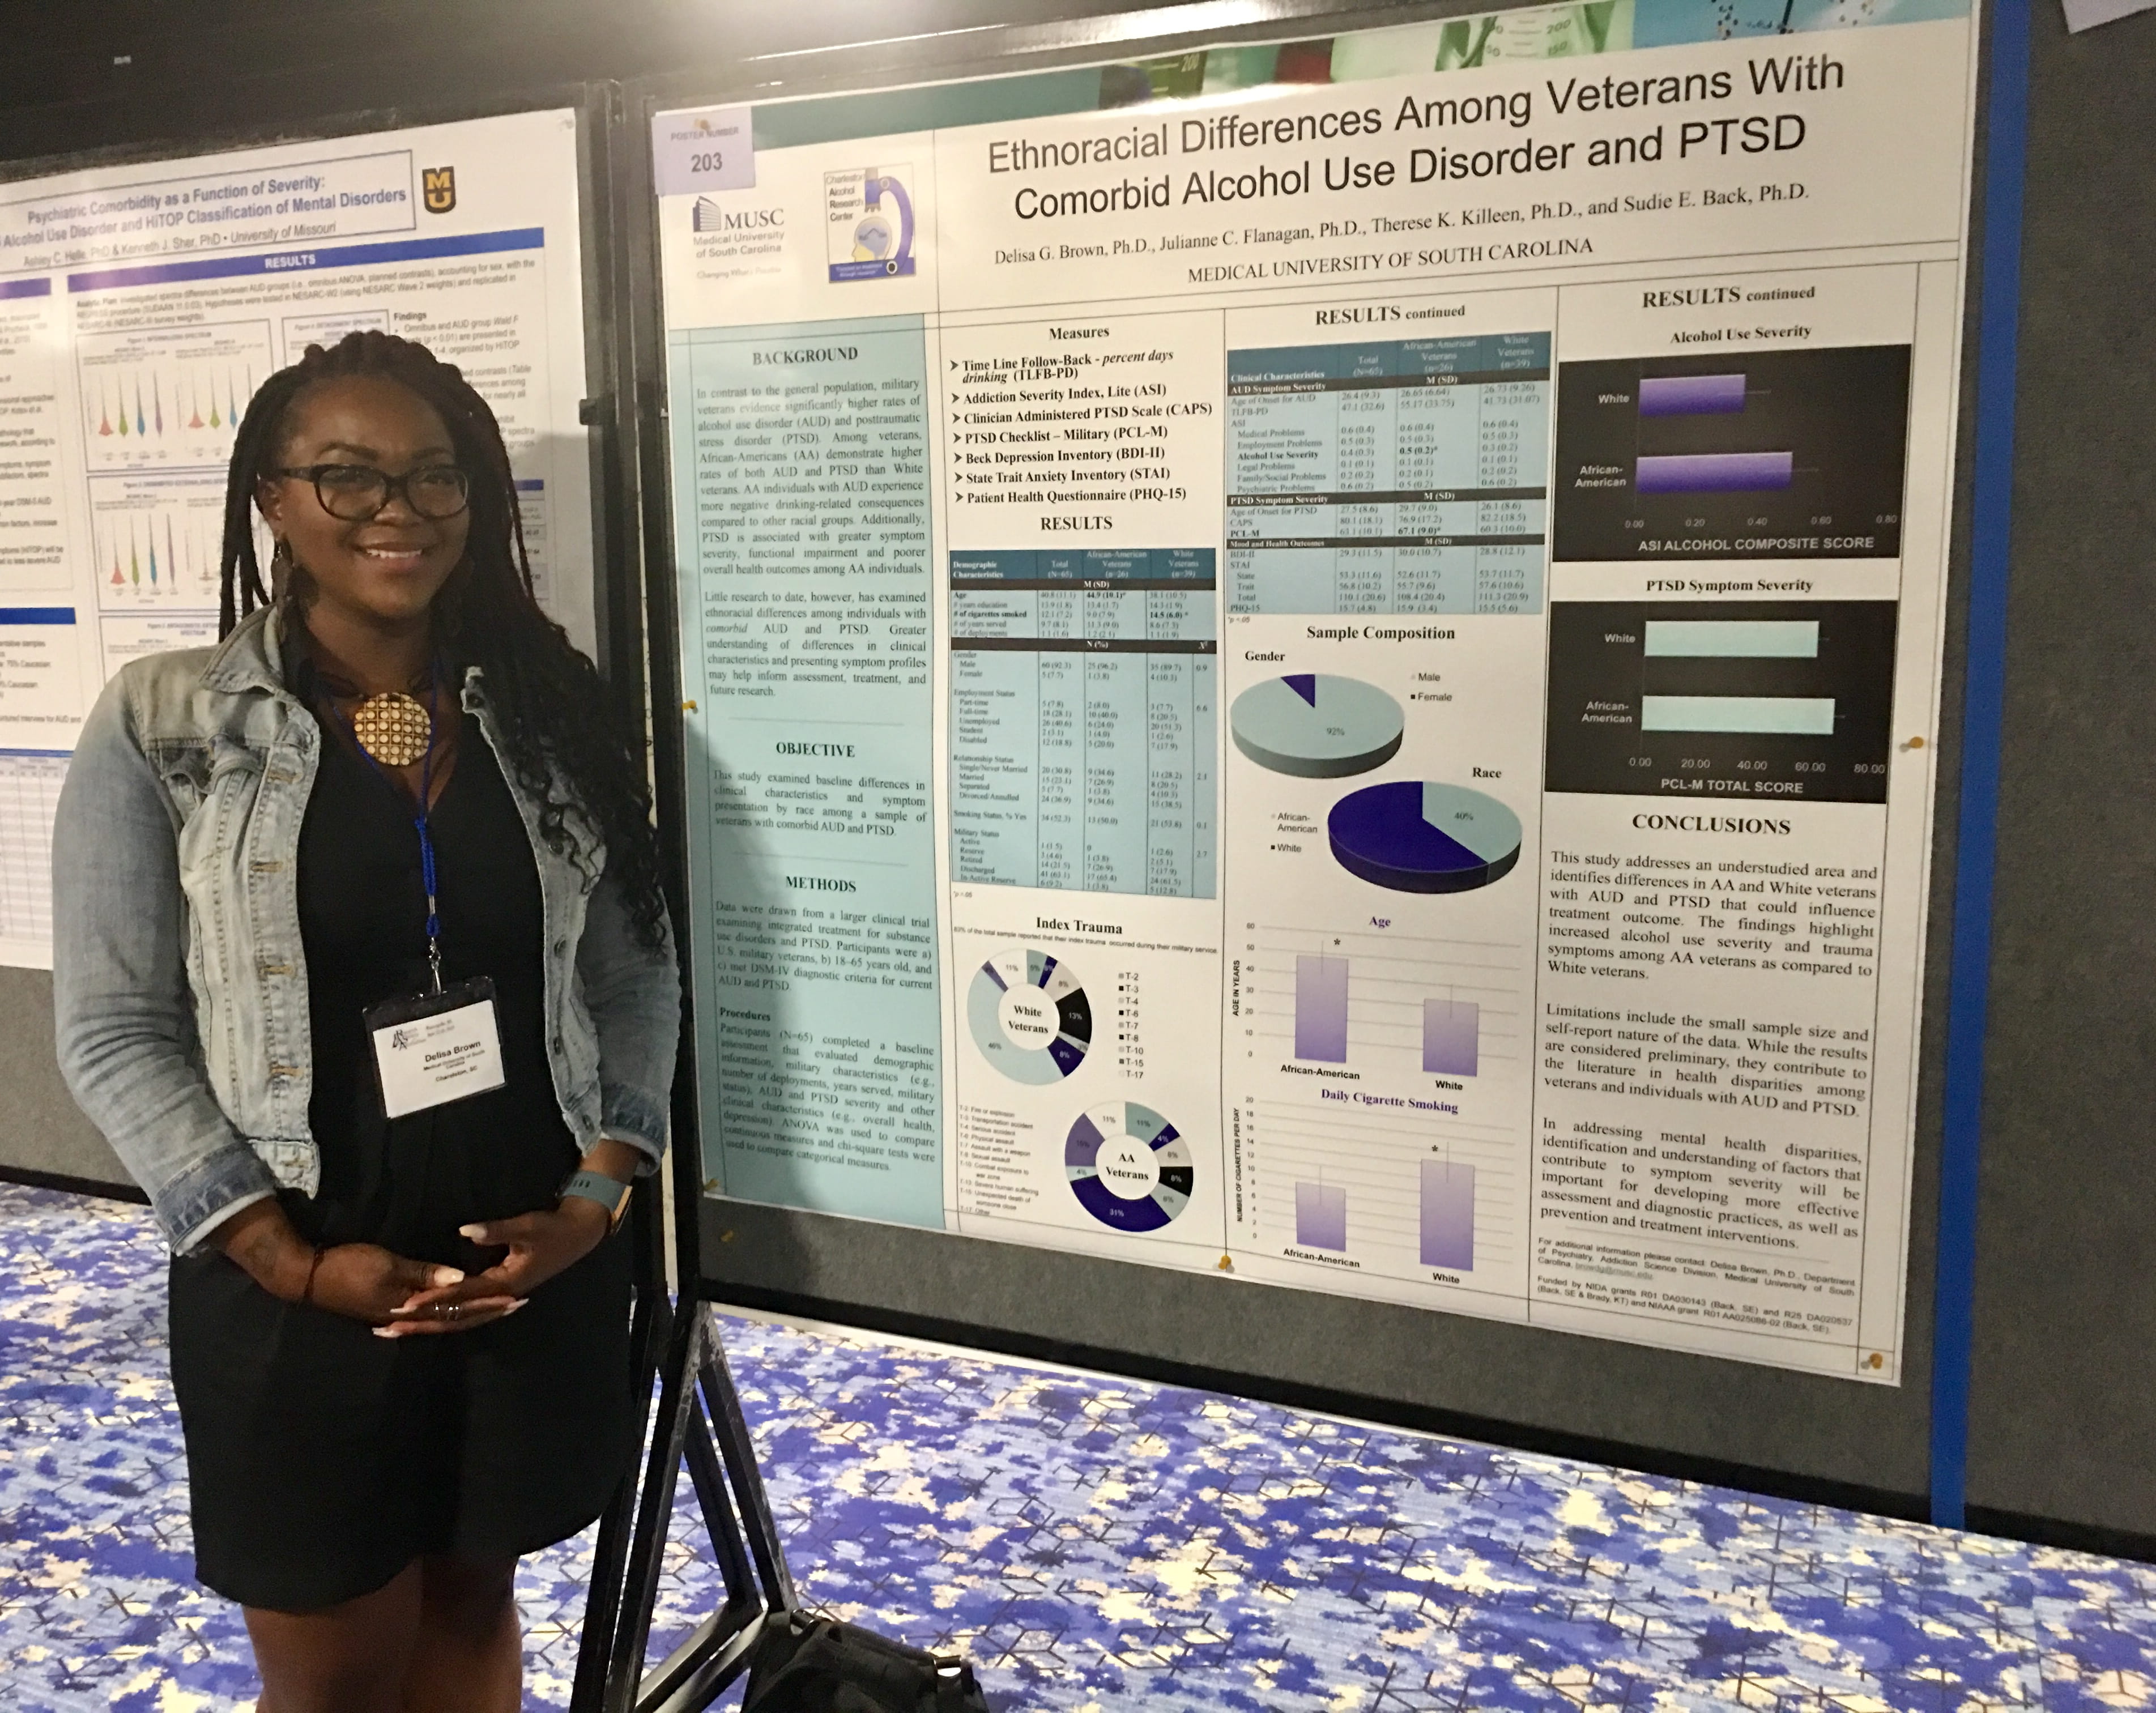 Delisa Brown presents at the 2019 RSA Annual Meeting